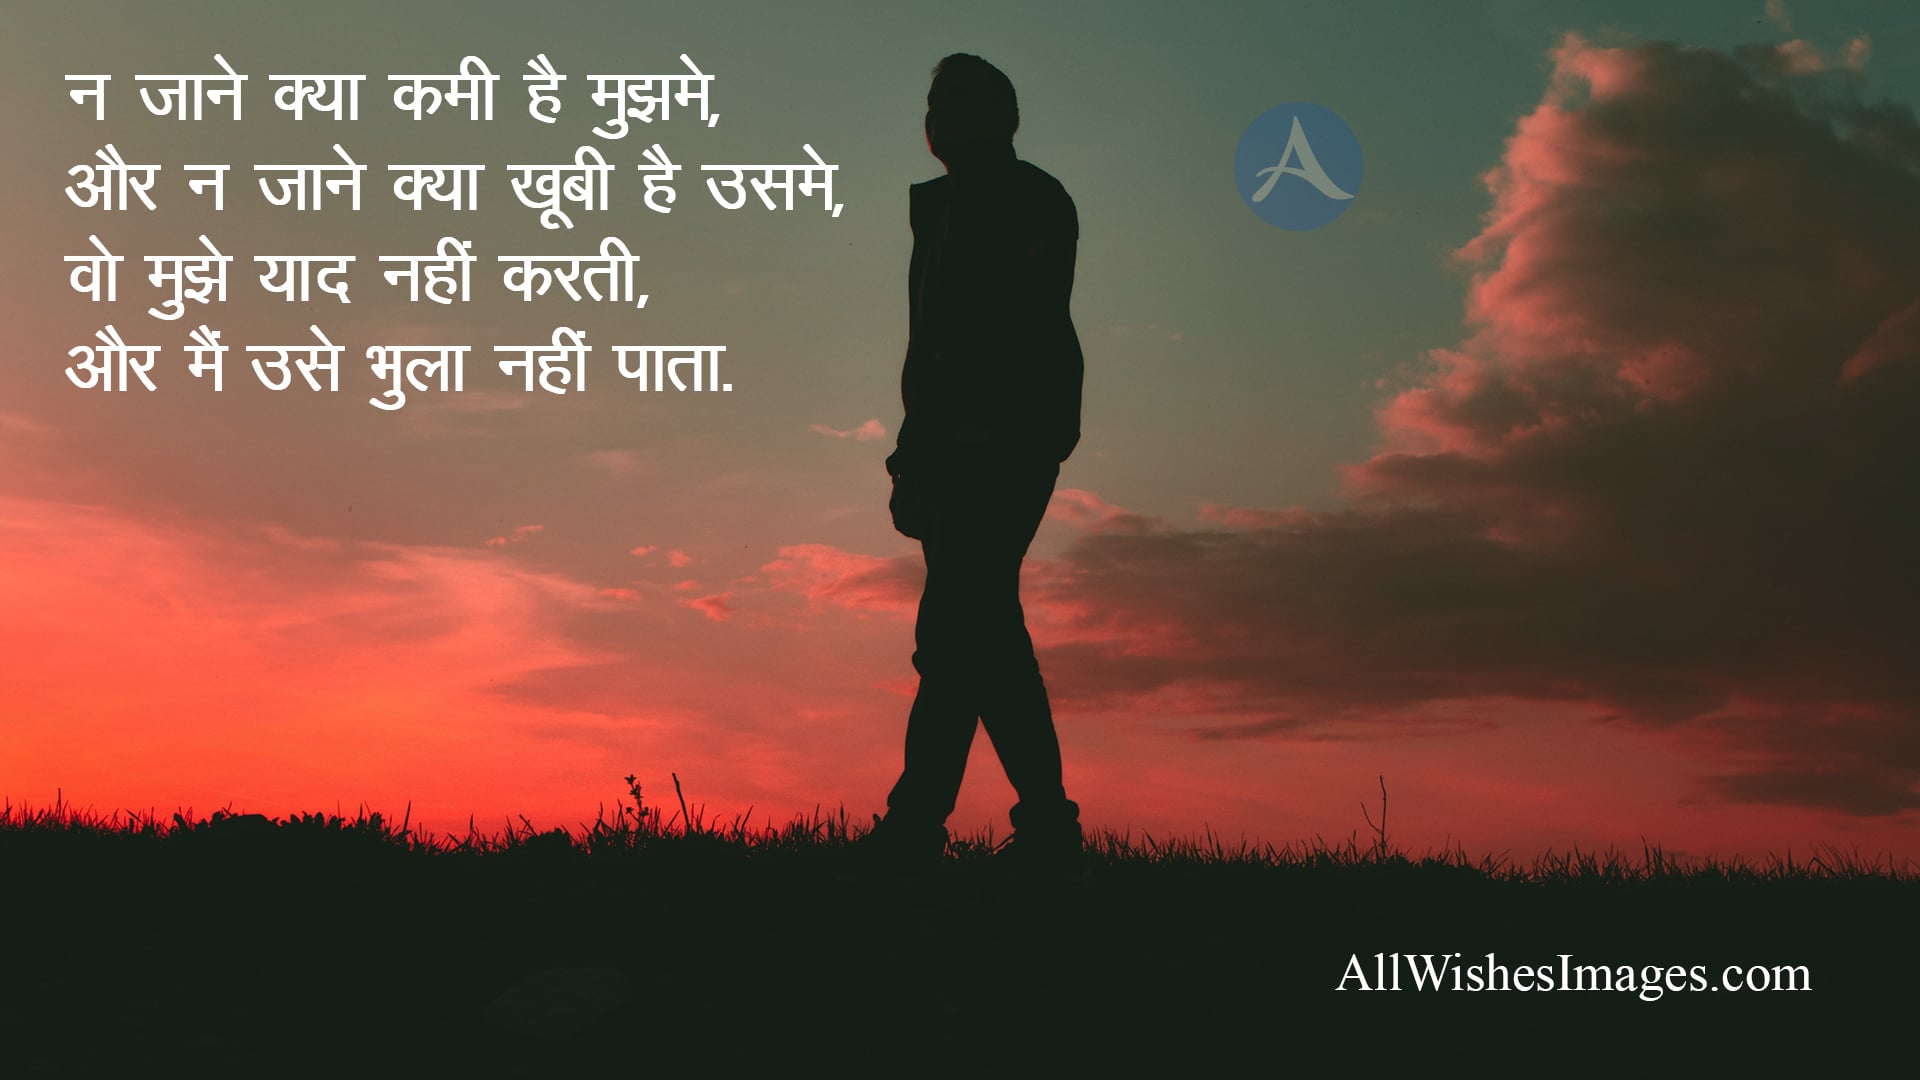 Sad Images With Quotes In Hindi - All Wishes Images - Images for WhatsApp